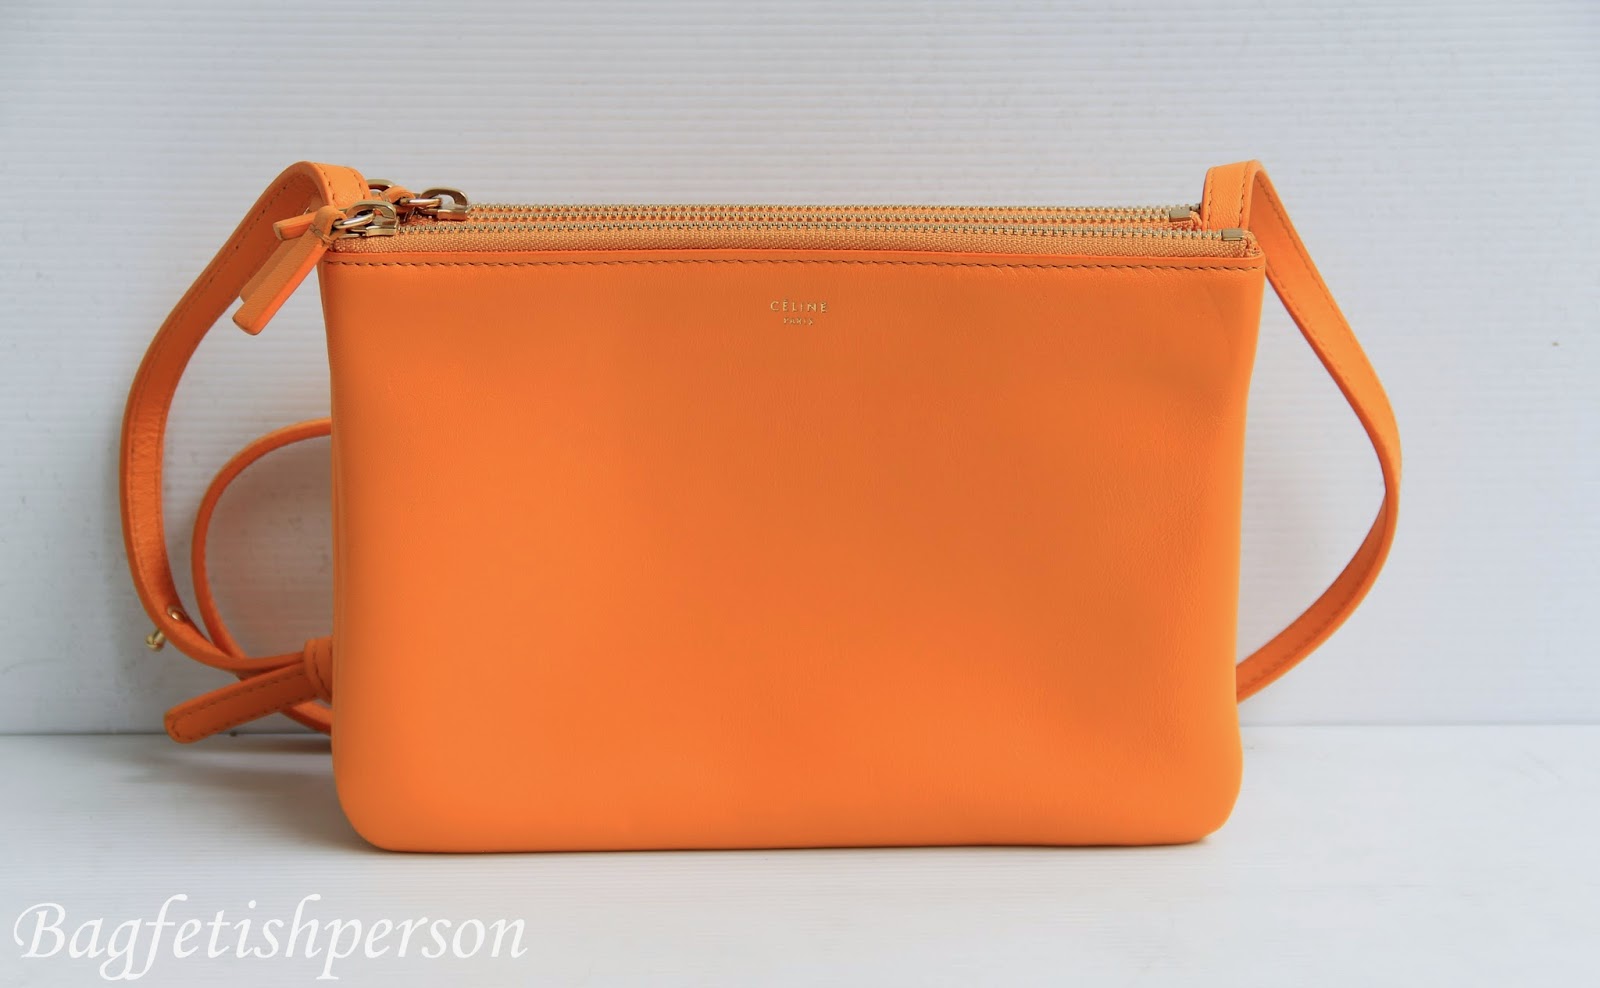 bagfetishperson: Reese Witherspoon and Hermes Garden Party Canvas